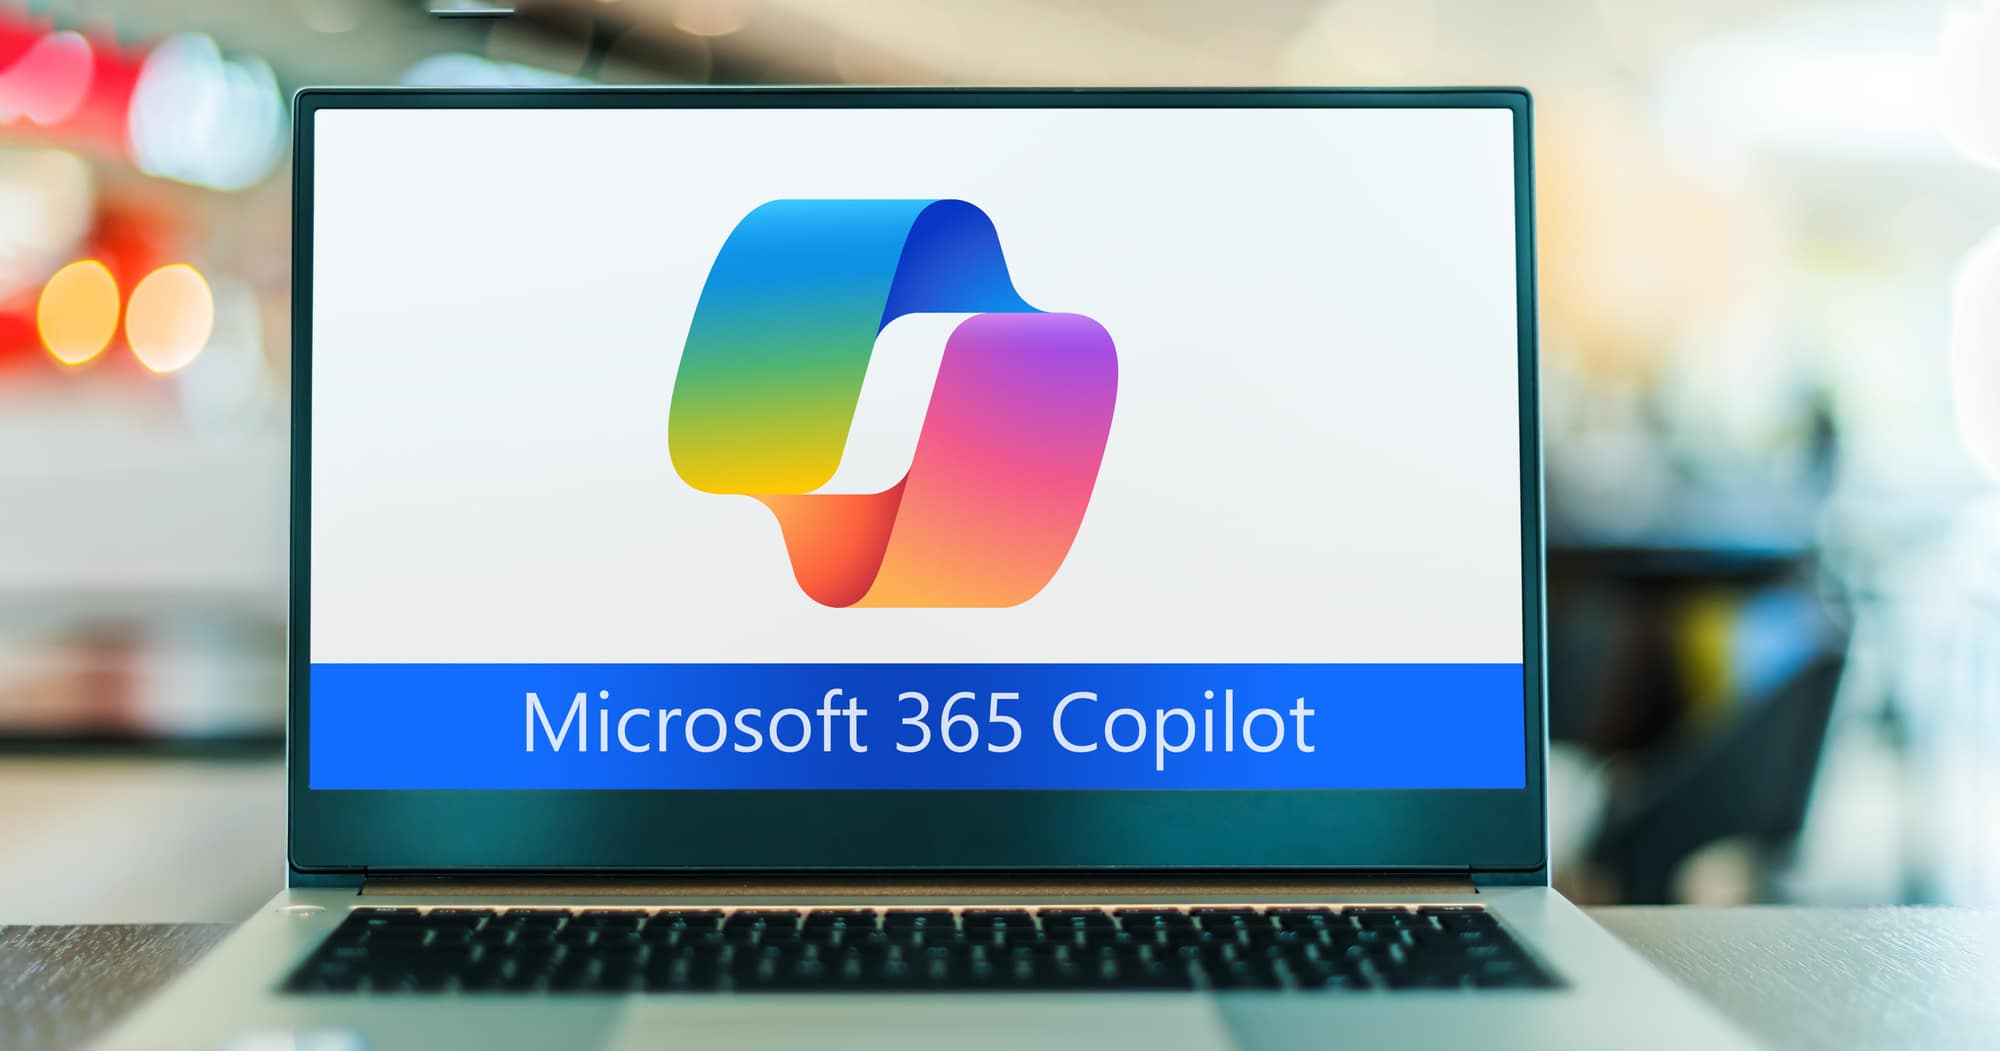 A laptop screen displaying the logo of Microsoft 365 Copilot pro. The logo consists of a multicolored shape resembling a folded ribbon in blue, green, yellow, and pink hues, positioned above the text "Microsoft 365 Copilot" in blue font. The laptop is on a table with a blurred background, suggesting a busy office or public space setting.